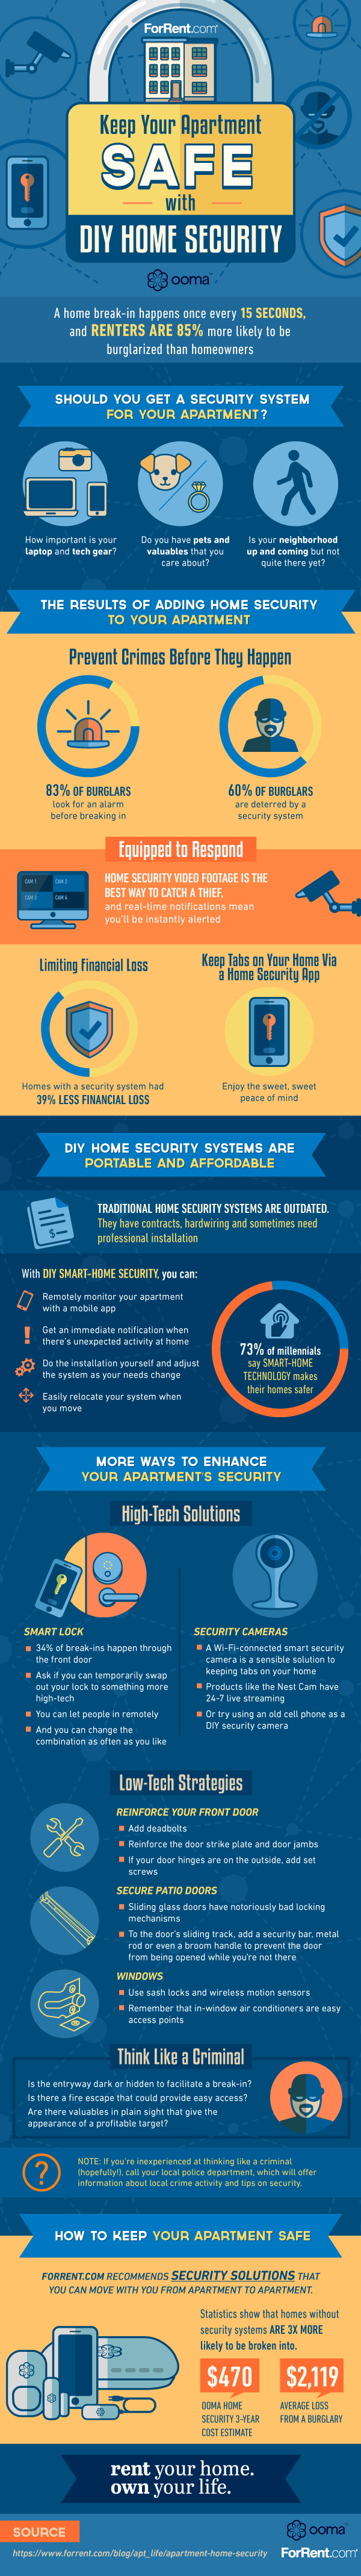 DIY Ways to Keep Your Home Safe - Infographic